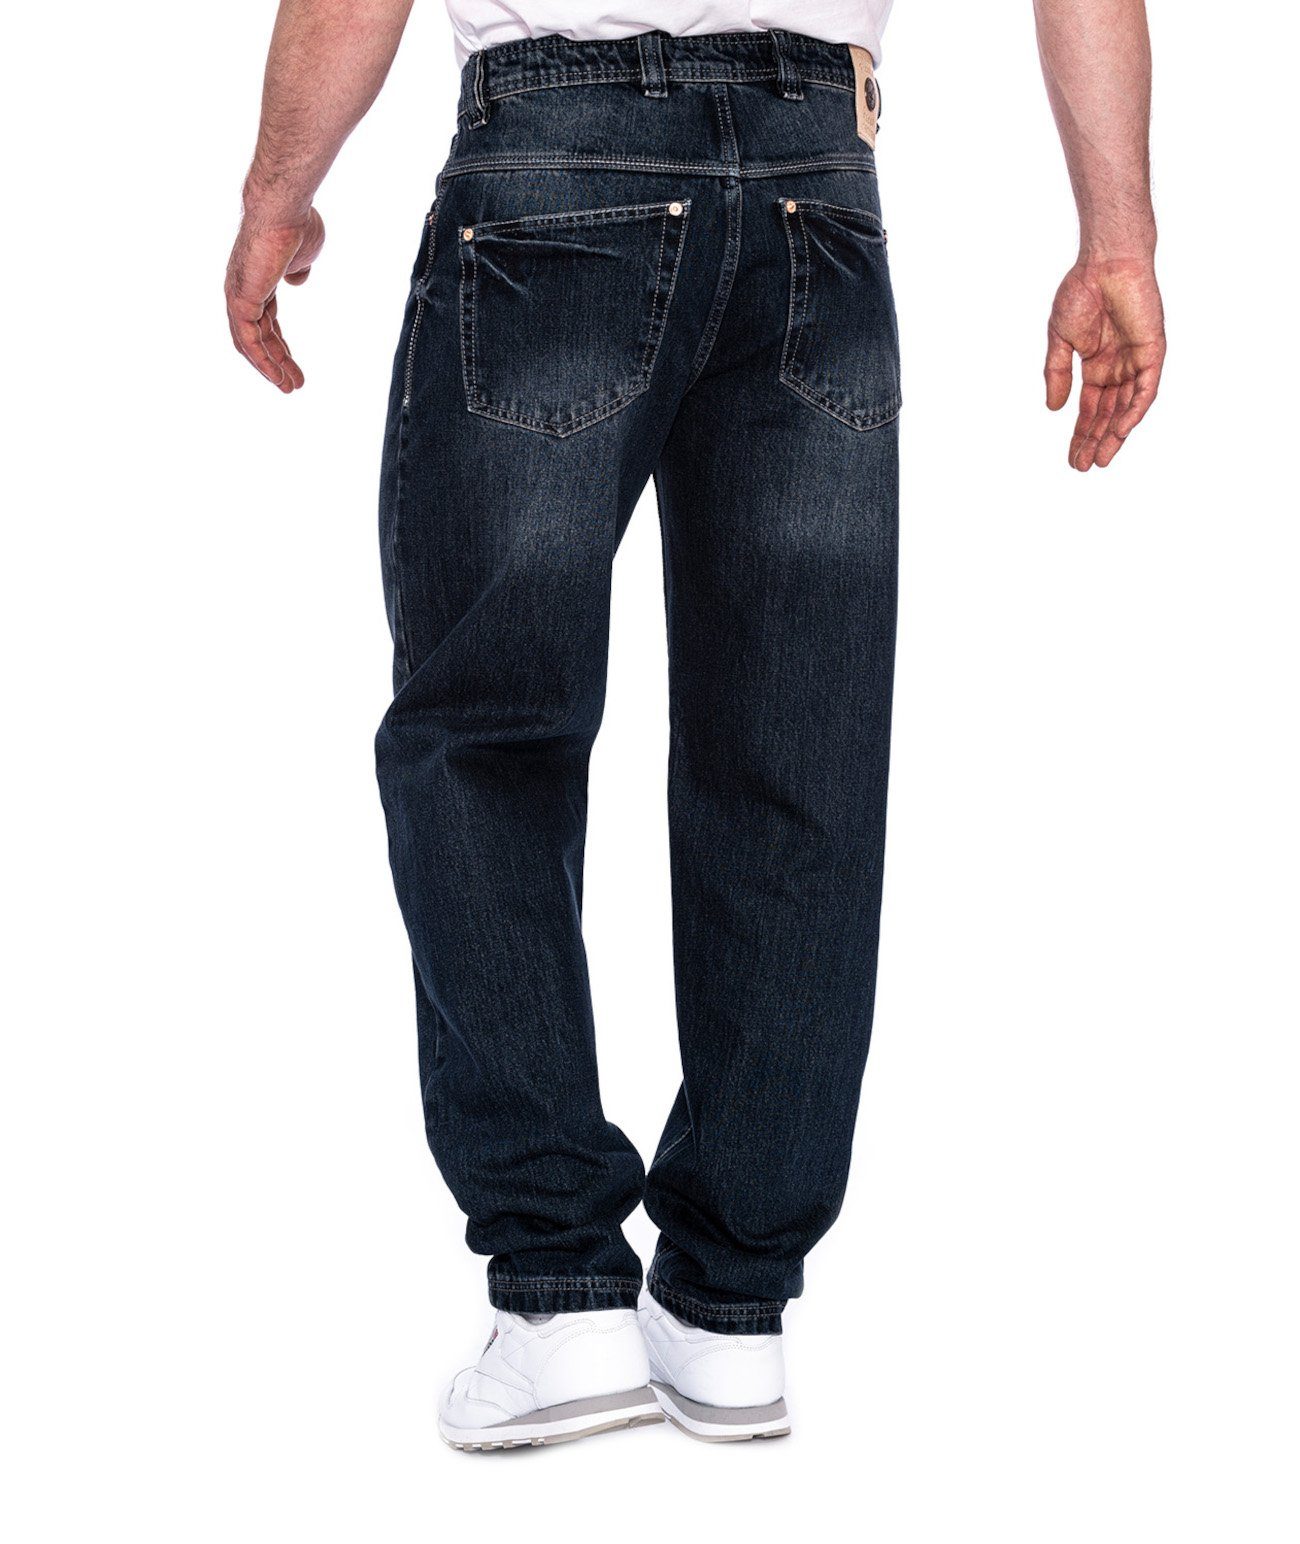 Indiana 472 Fit, Fit Loose Weite Jeans Zicco PICALDI Relaxed Jeans